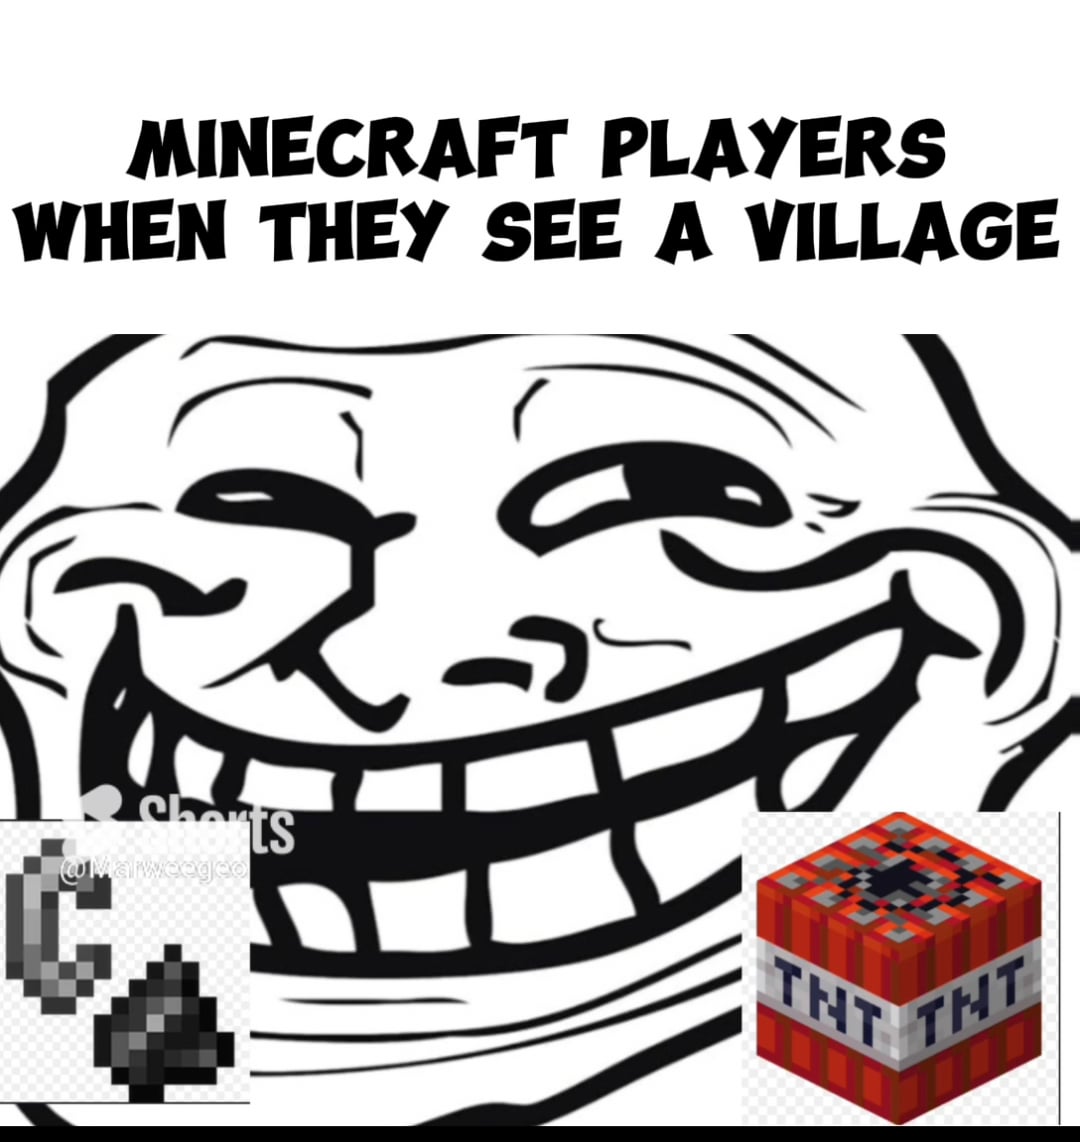 Minecraft Memes - Minecraft players be like "n00bs can't relate"